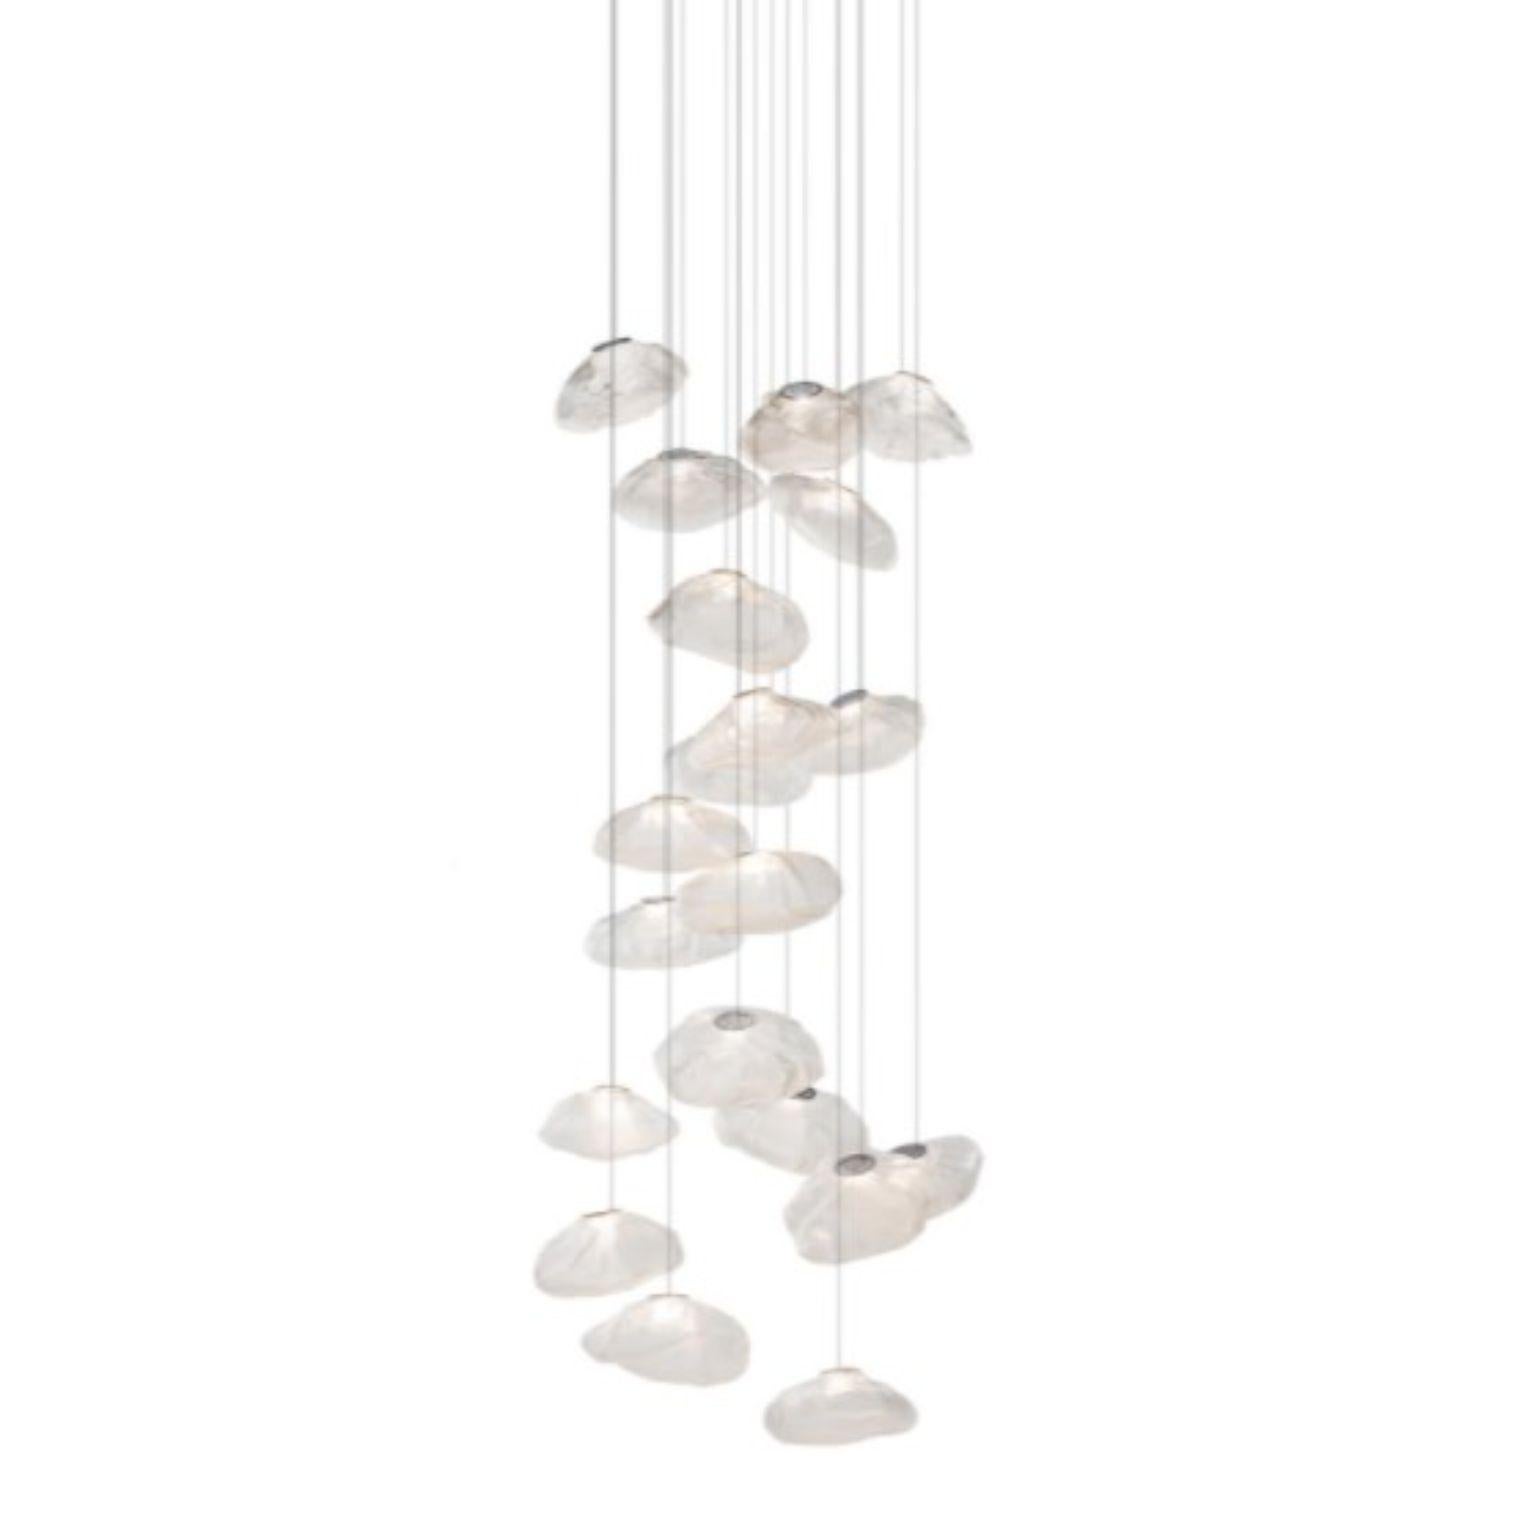 73.20 pendant by Bocci
Dimensions: D 75.5 x H 300 cm
Materials: Twenty clear pendants, Brushed nickel round canopy
Weight: 69 kg
Also available in different dimensions and colors.

All our lamps can be wired according to each country. If sold